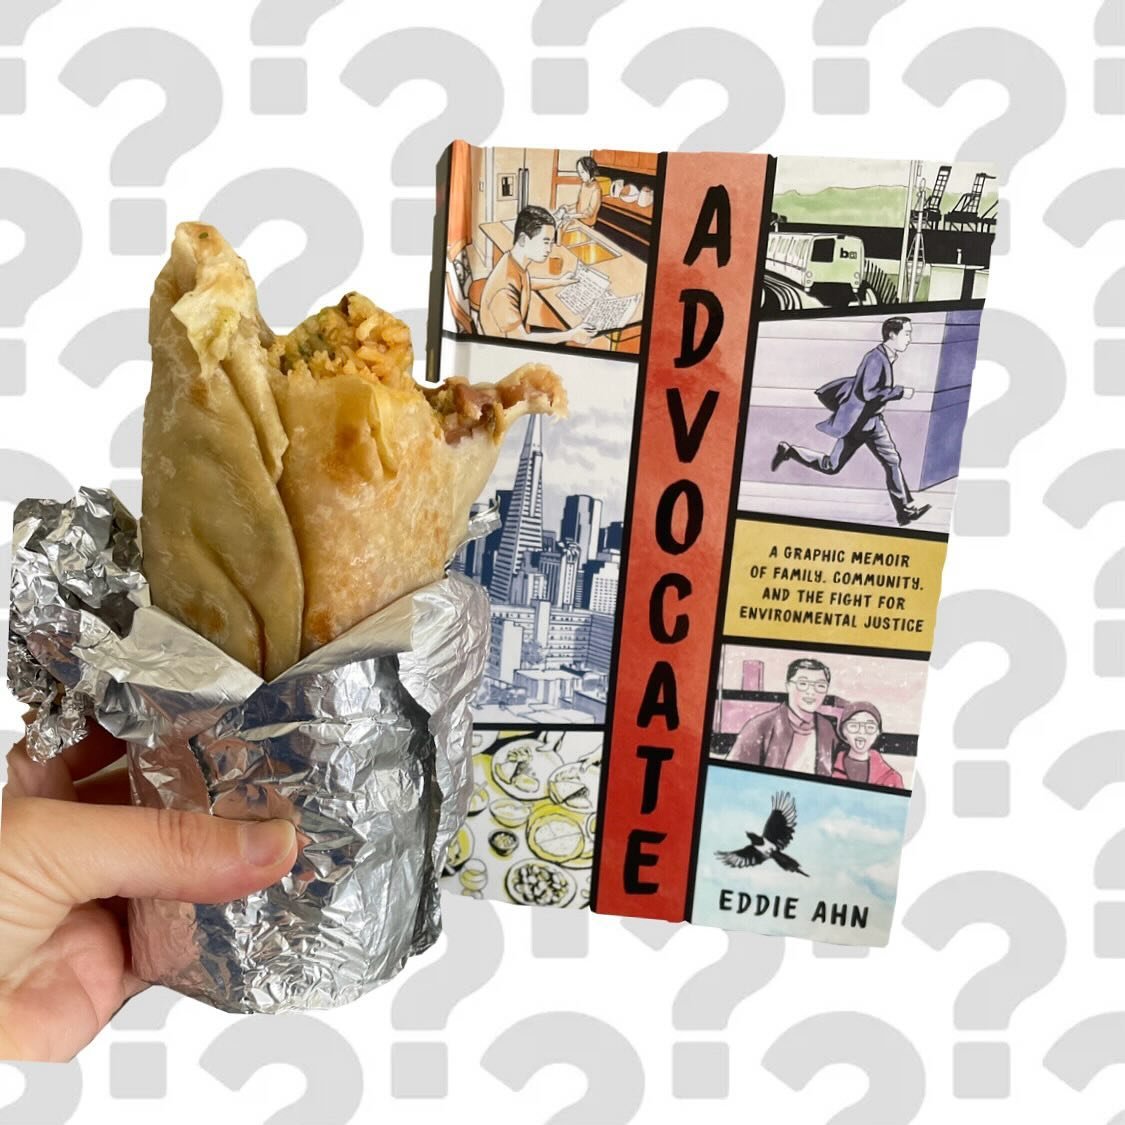 What does a San Francisco burrito have to do with this month&rsquo;s Graphic Novel Club pick? ➡️
If ya know, ya know! Pick up your copy before we host Eddie THIS SUNDAY for a discussion. See you there!